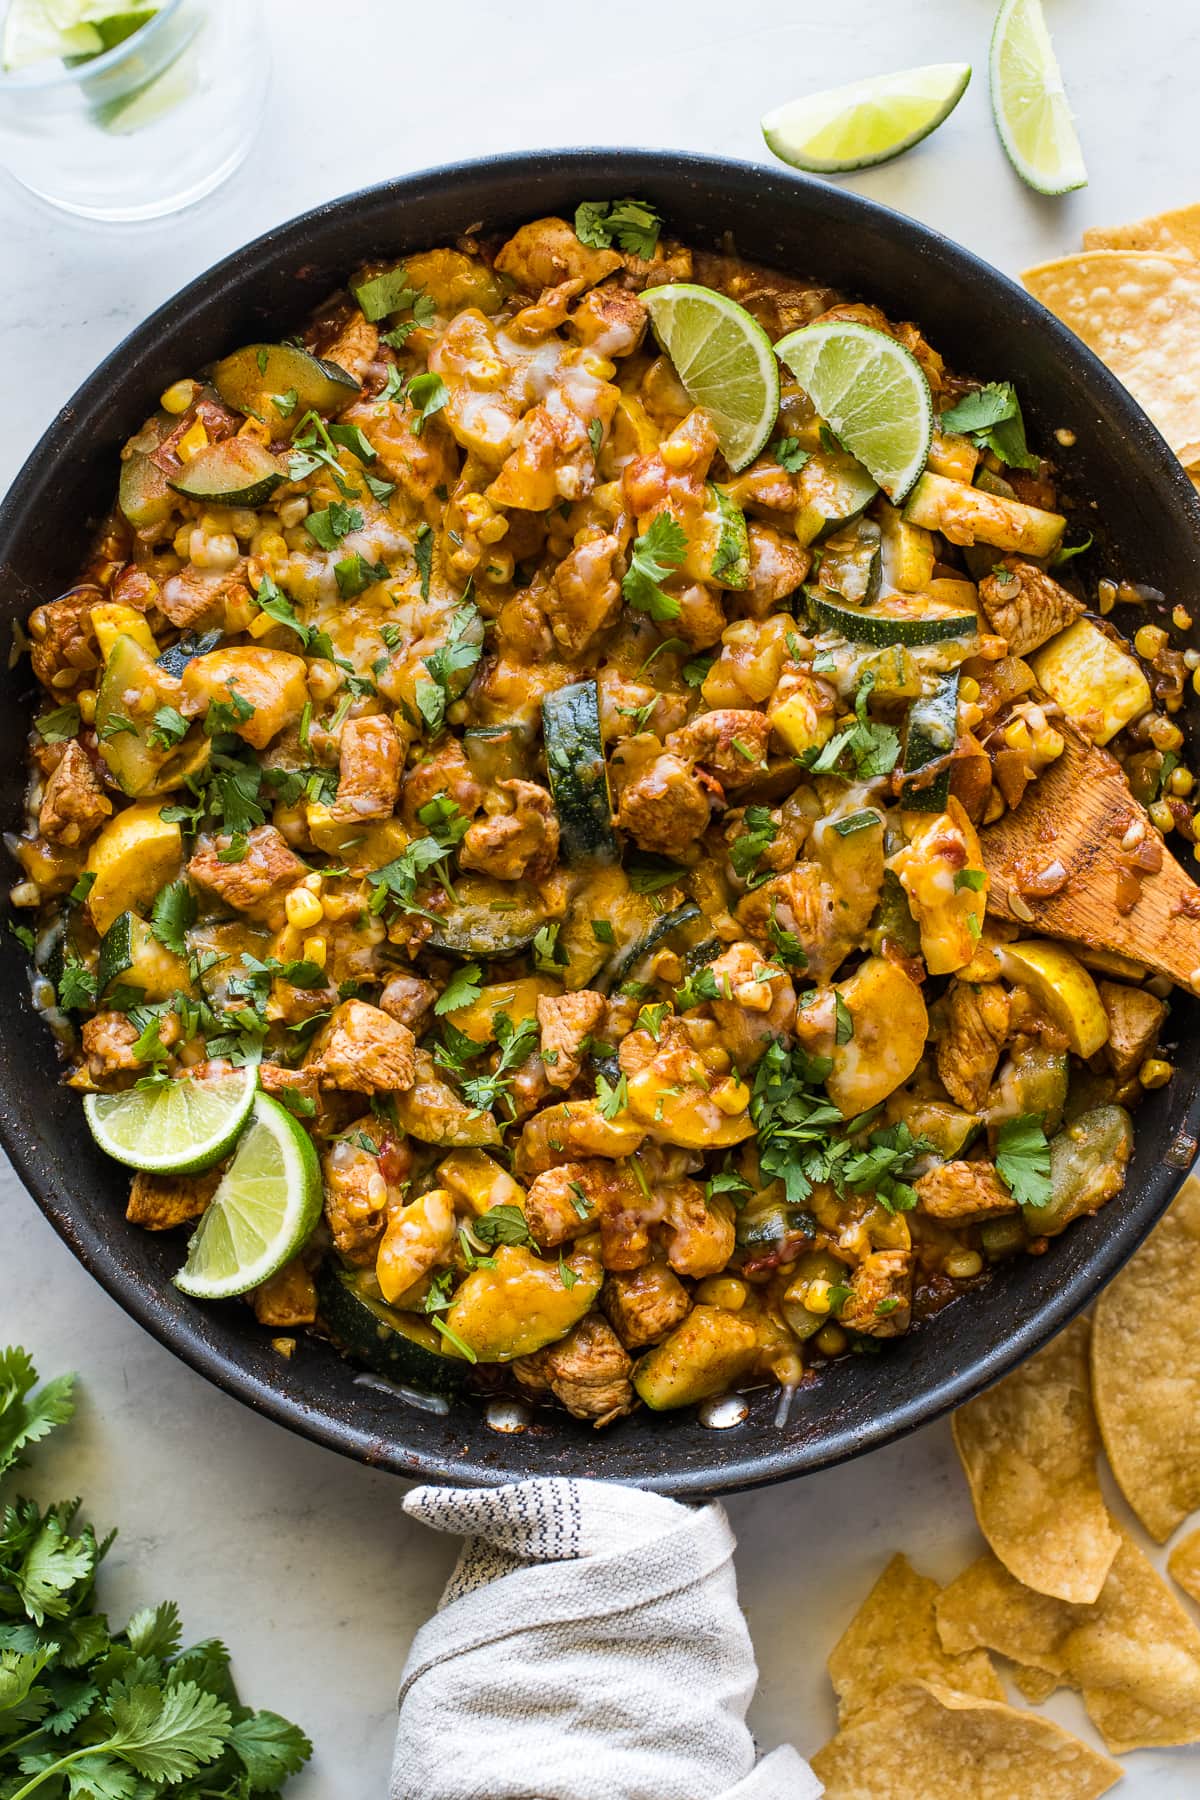 Chicken and Squash in a skillet with cilantro and limes.